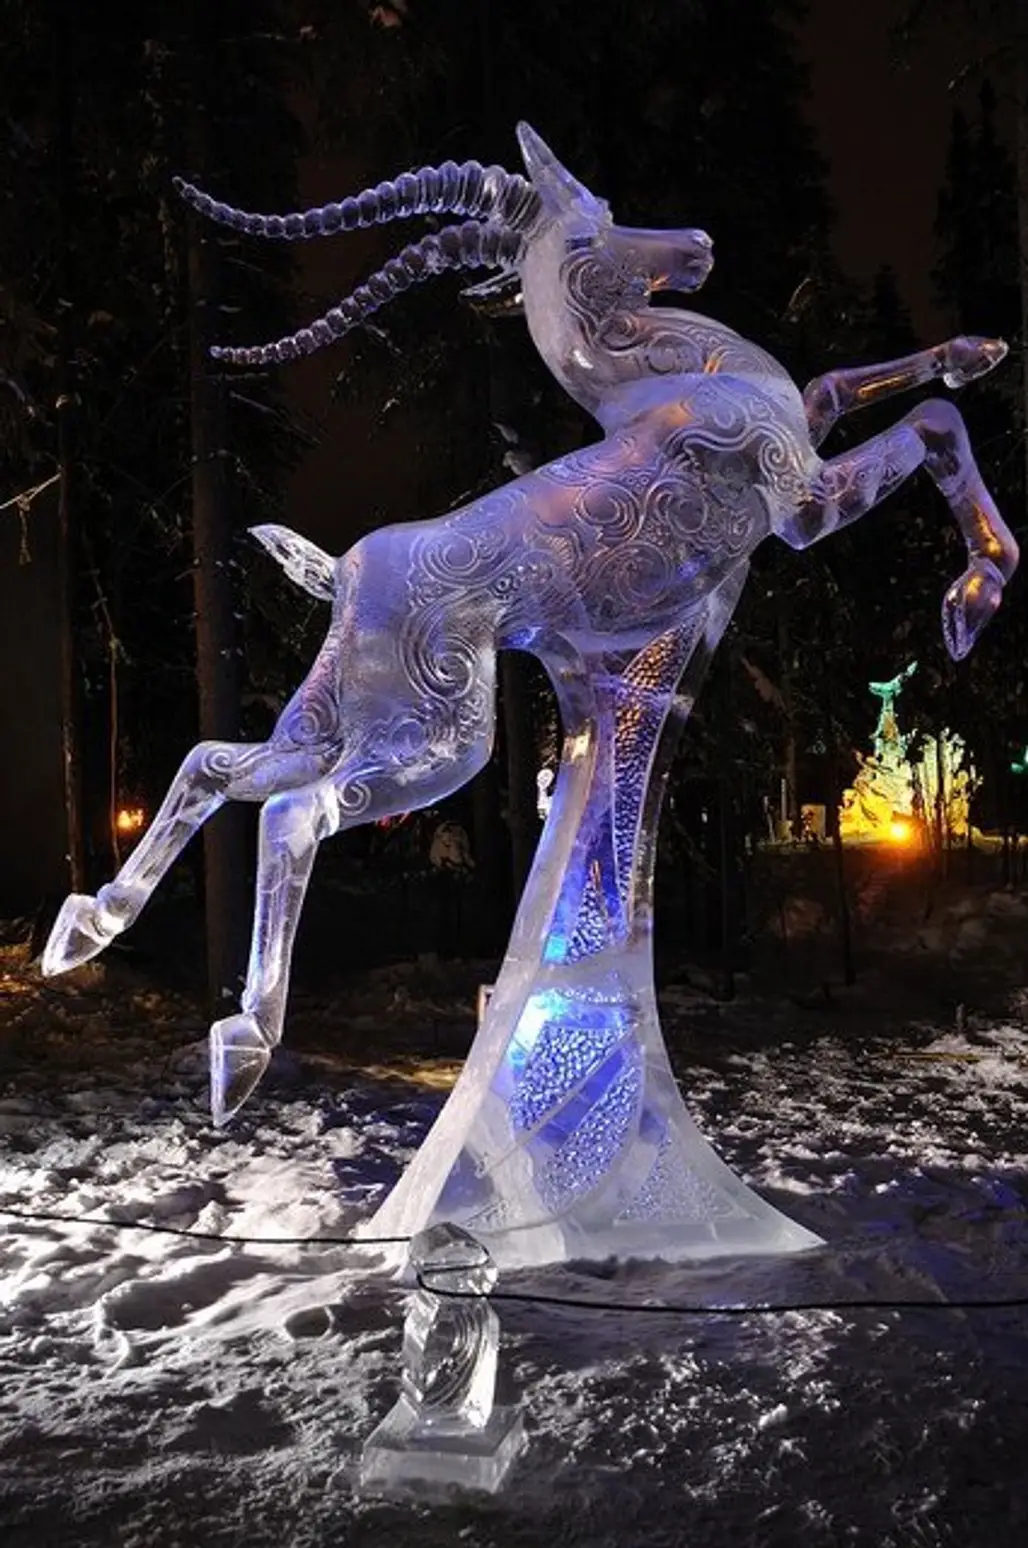 "Chasing the Wind" Ice Sculpture